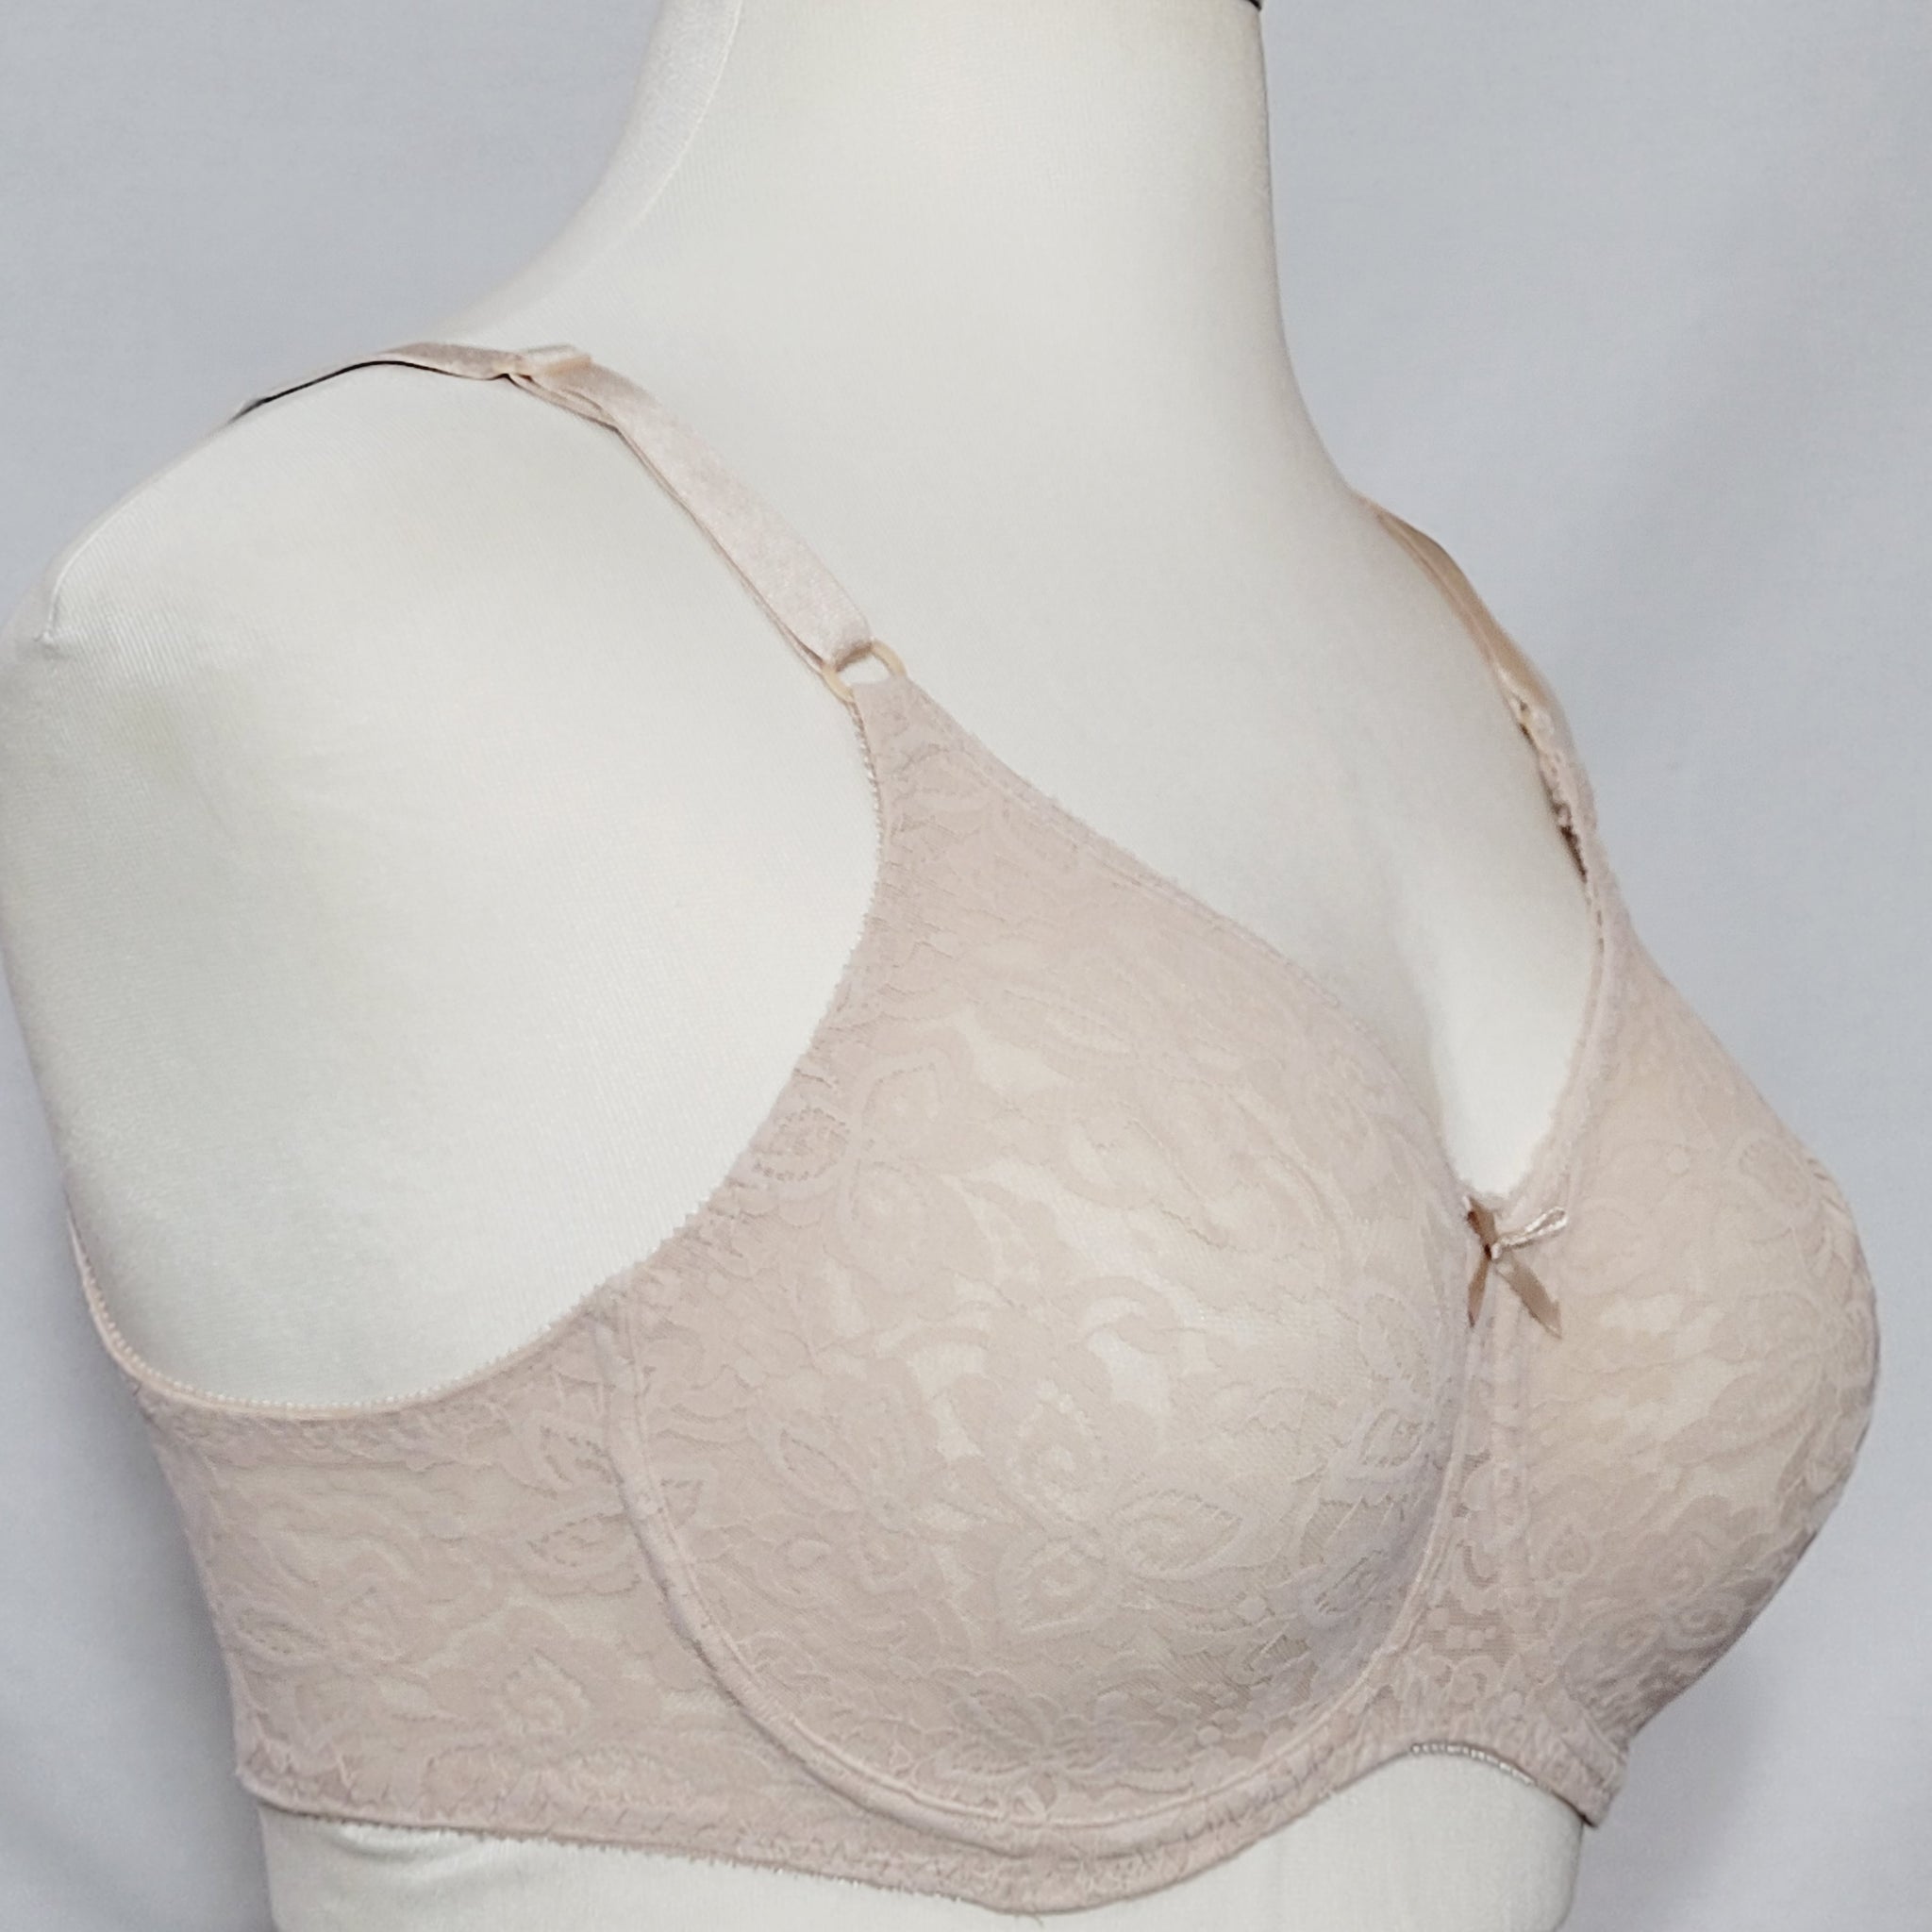 Bali 3432 Lace N Smooth Underwire Bra 34D Nude